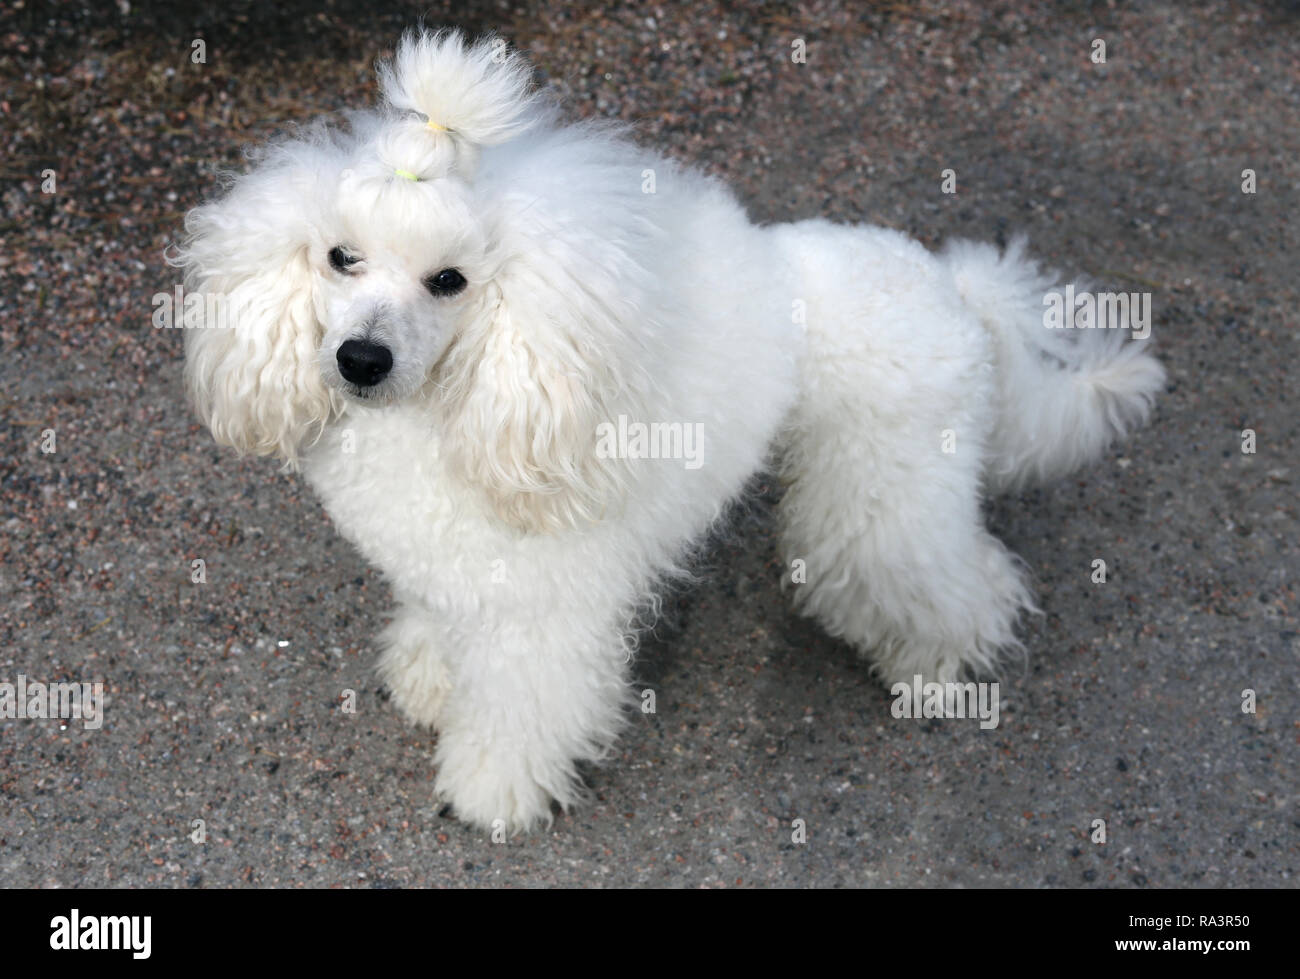 Portrait of my young white miniature poodle. This dog is super cute, furry and fluffy friend with white fur, black nose and black eyes. Stock Photo